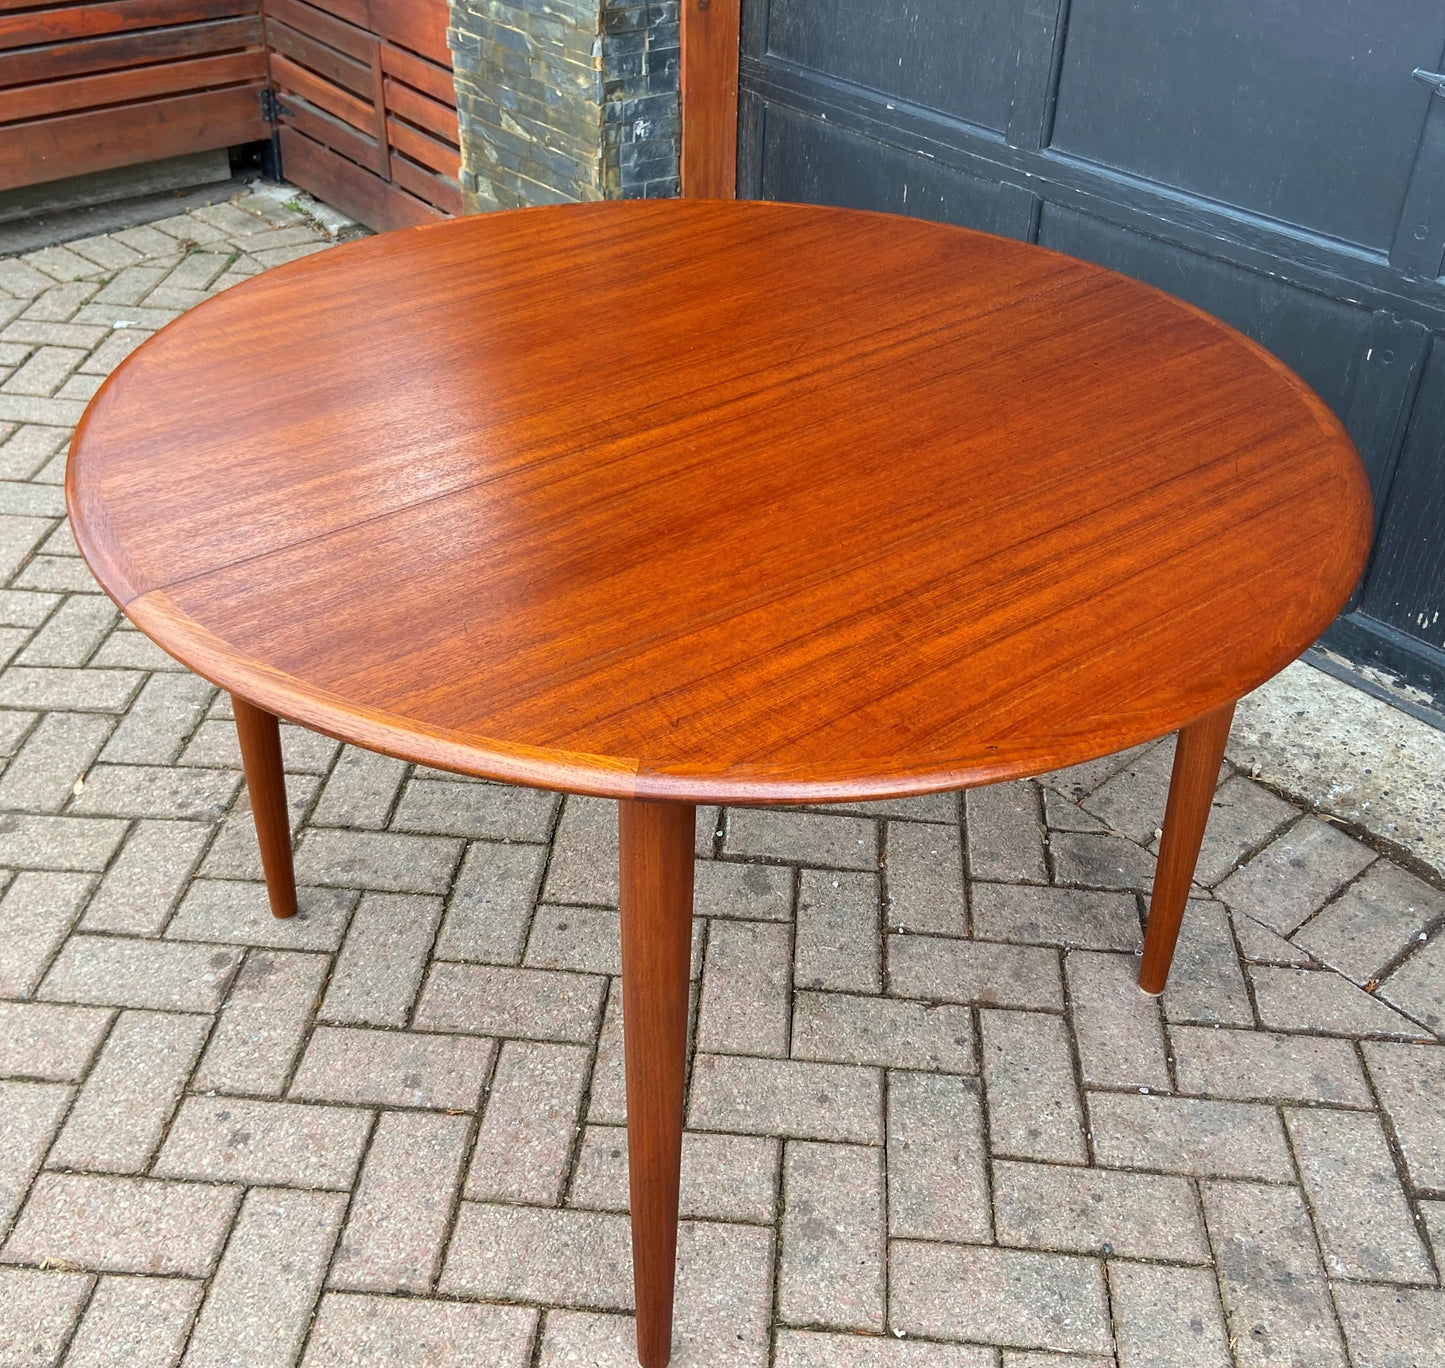 REFINISHED Danish MCM Teak Table Round with 2 Leaves by Skovmand and Andersen for Moreddi, 47"-86"